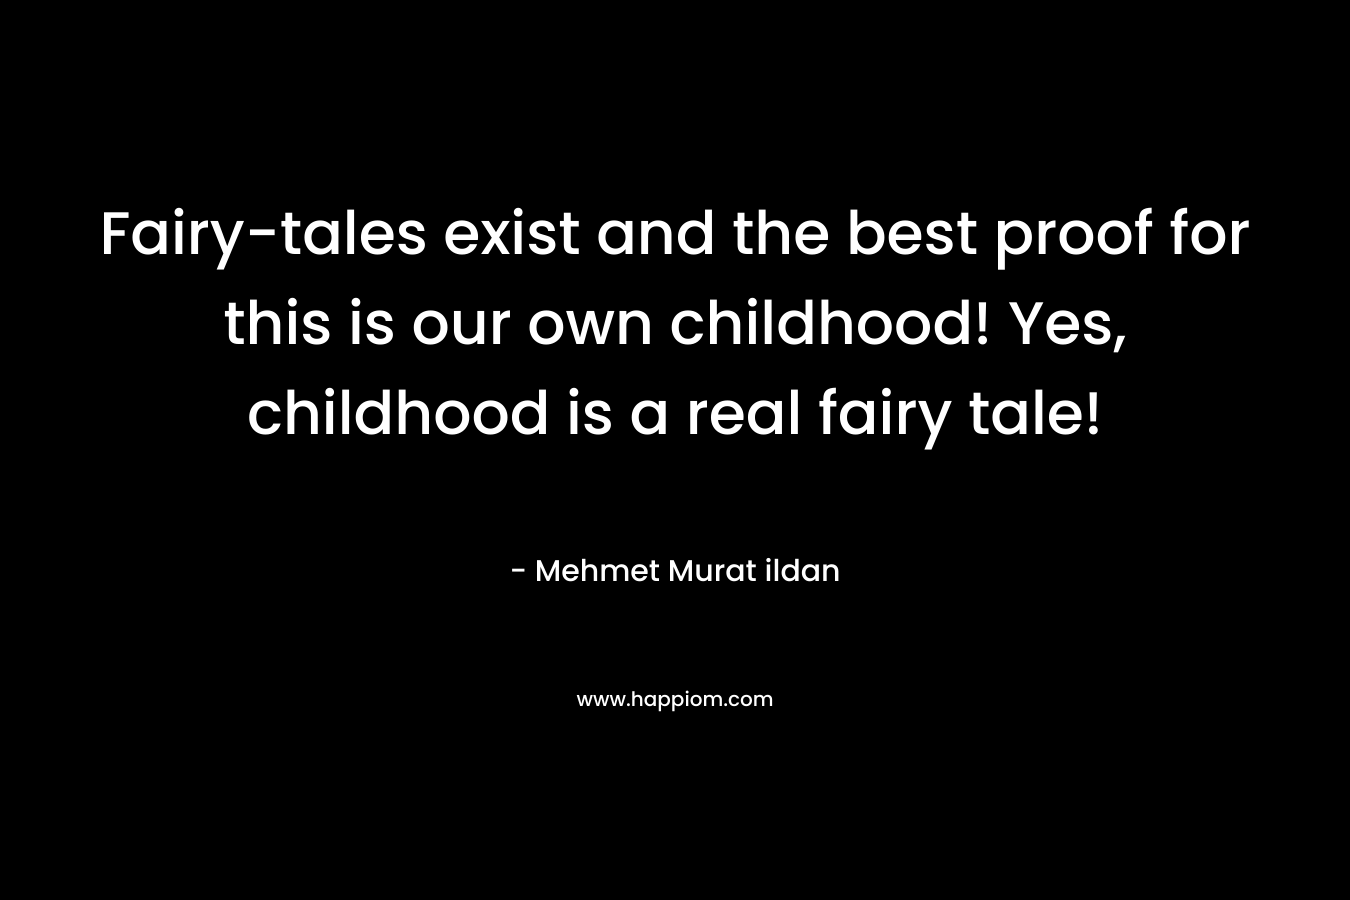 Fairy-tales exist and the best proof for this is our own childhood! Yes, childhood is a real fairy tale!